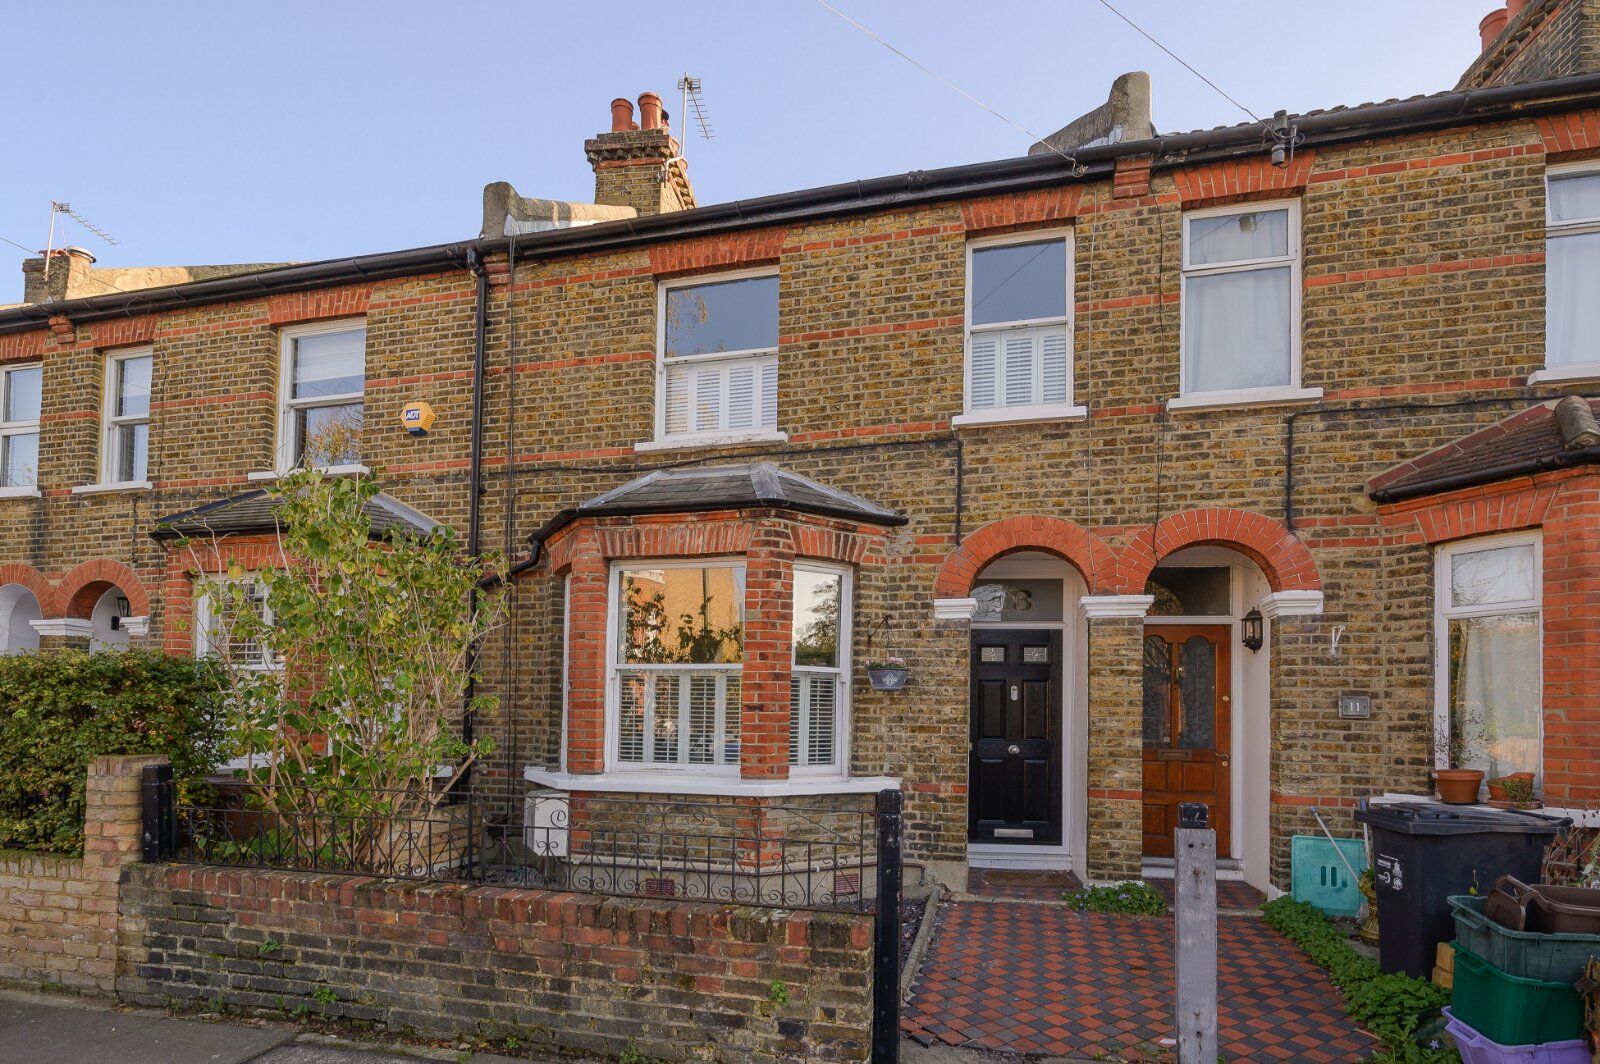 3 bedroom mid terraced house for sale Wycliffe Road, London, SW19, main image